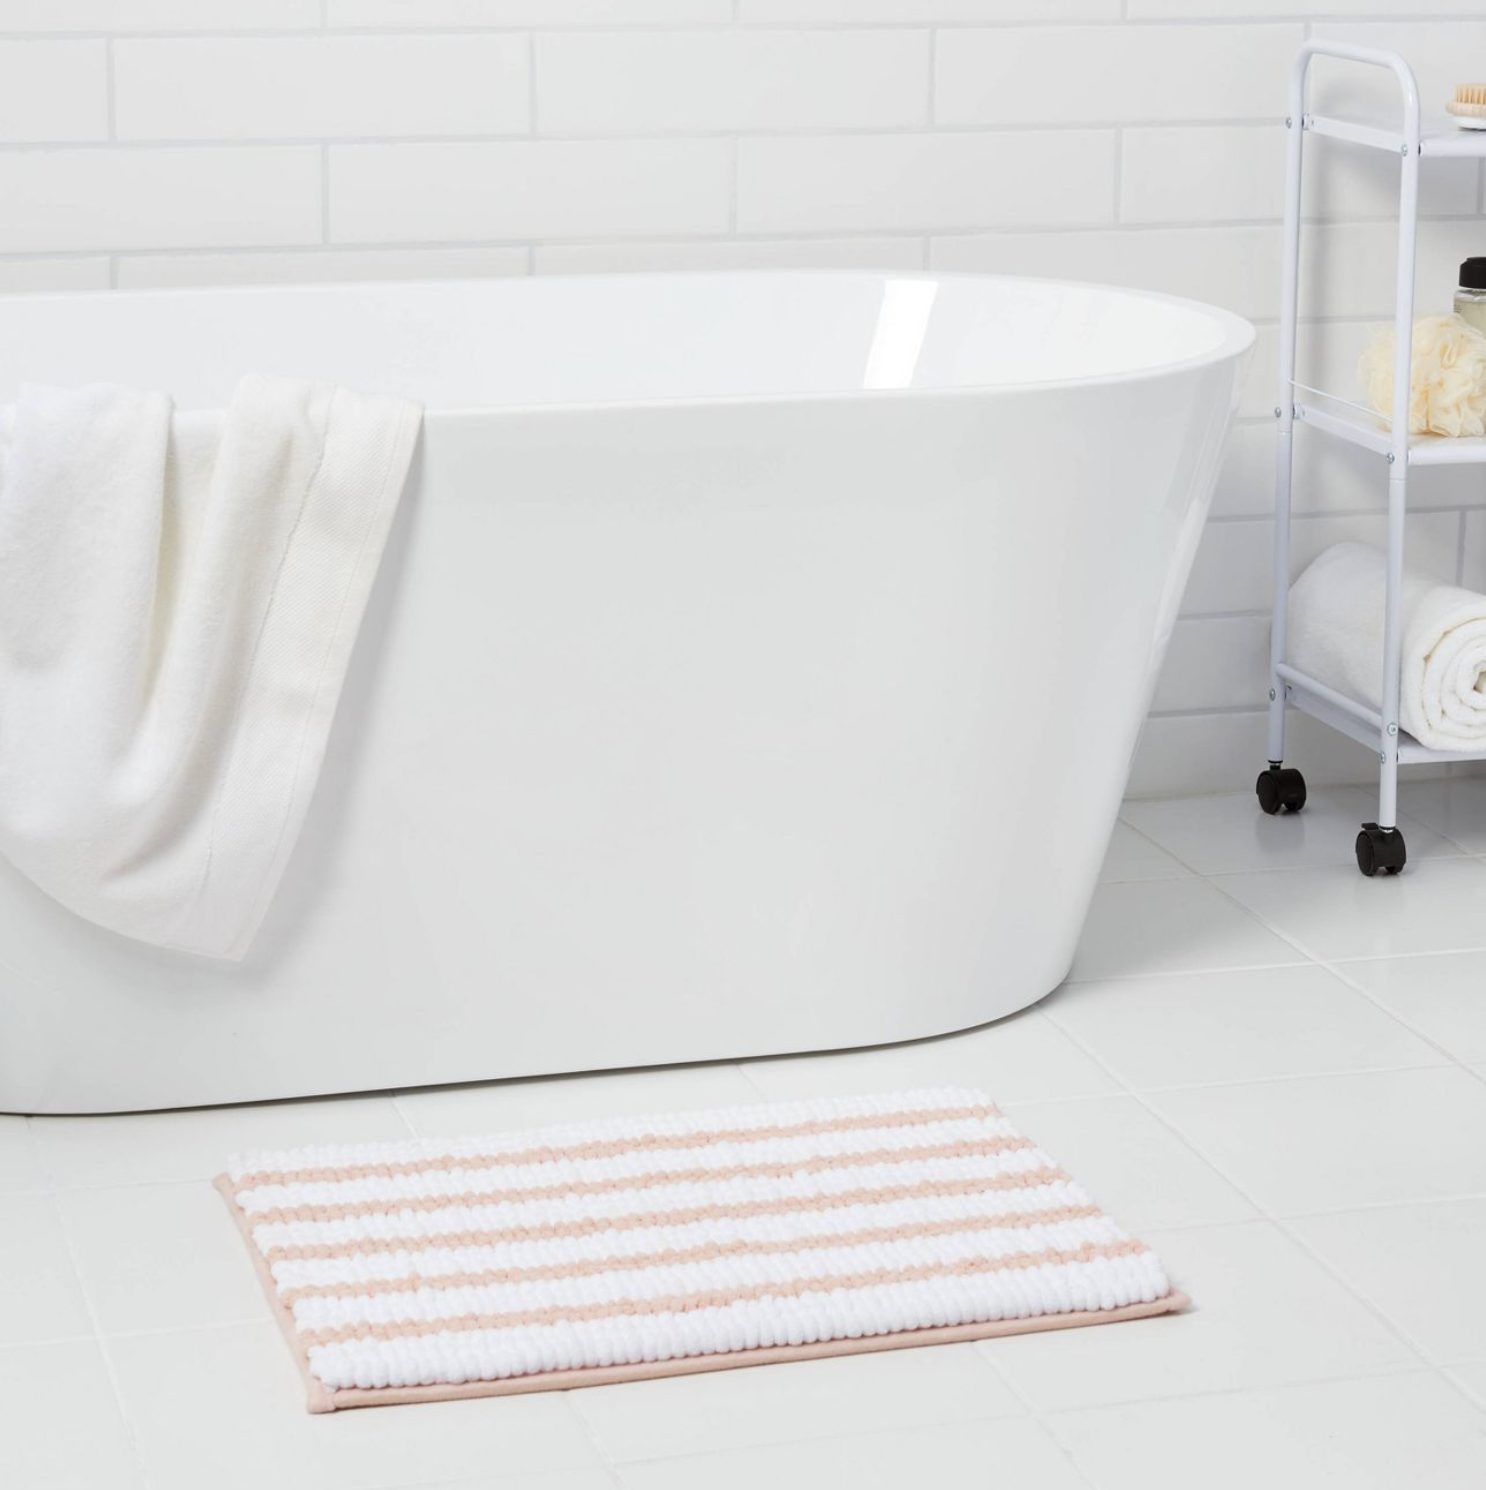 the pink and white striped rug in front of a bathtub